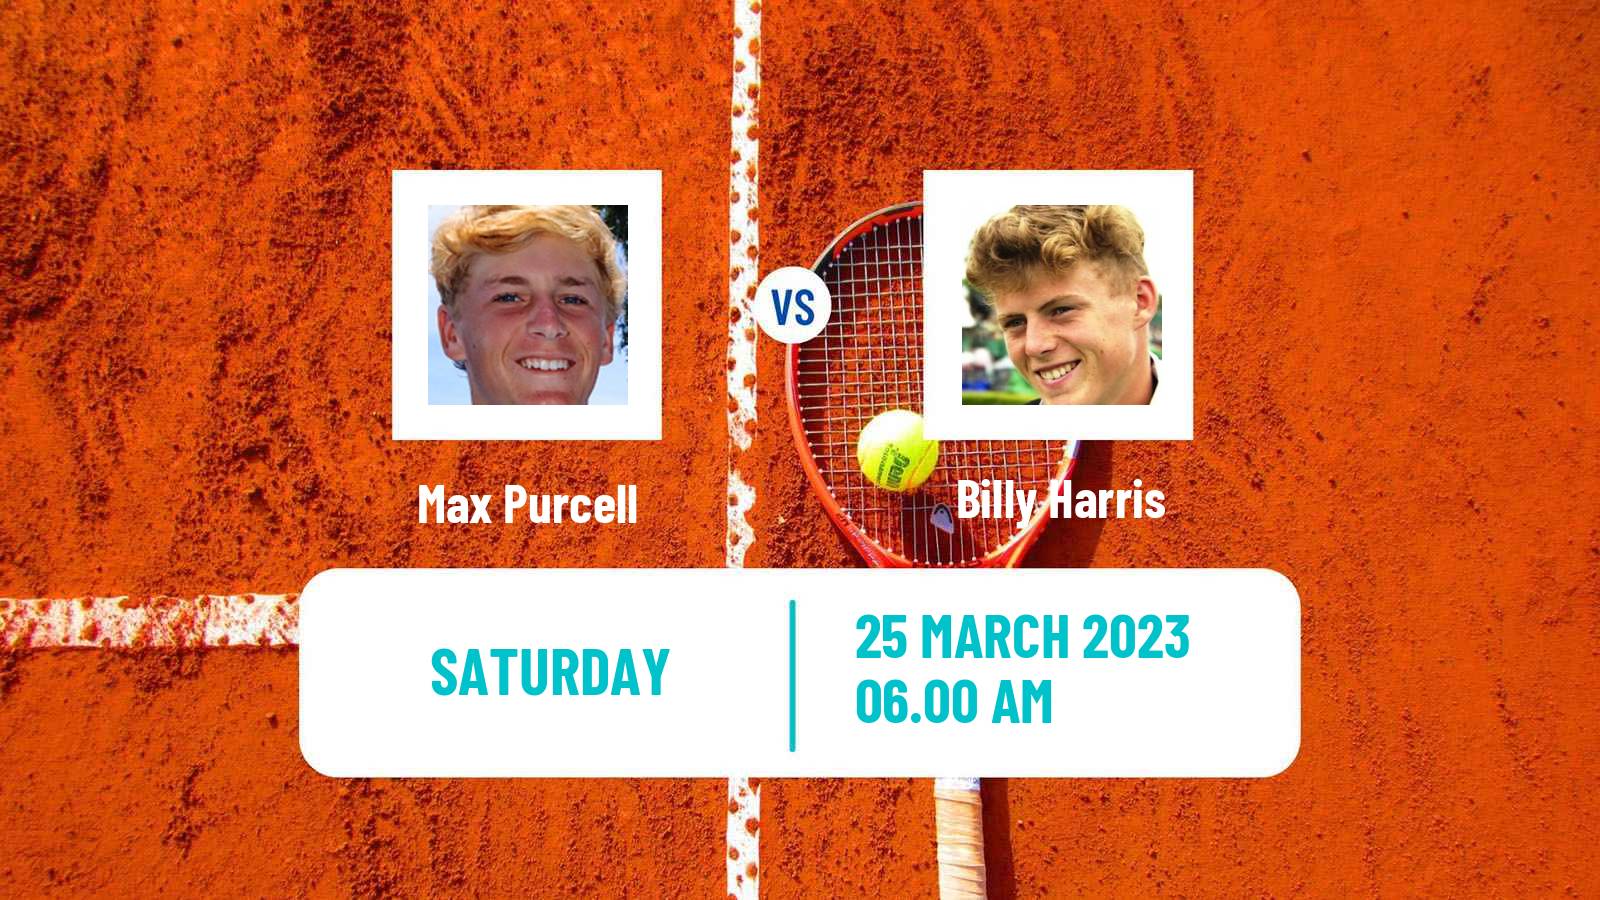 Tennis ATP Challenger Max Purcell - Billy Harris